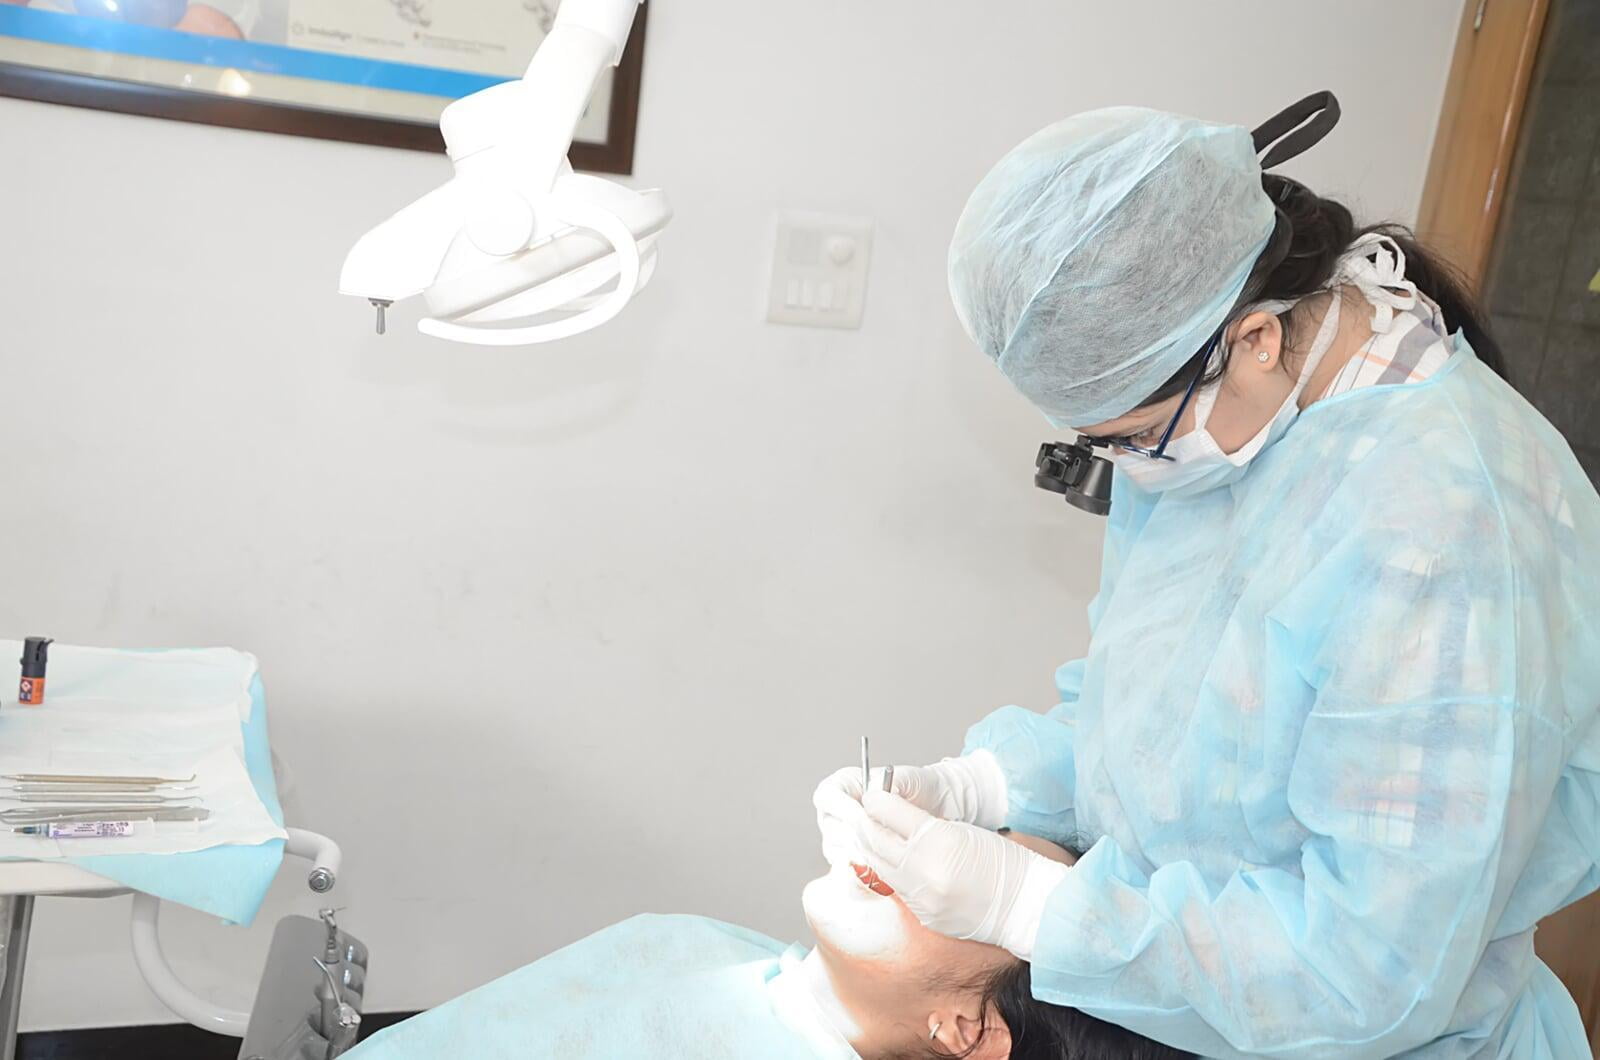 What to expect in Wisdom Tooth Extraction?